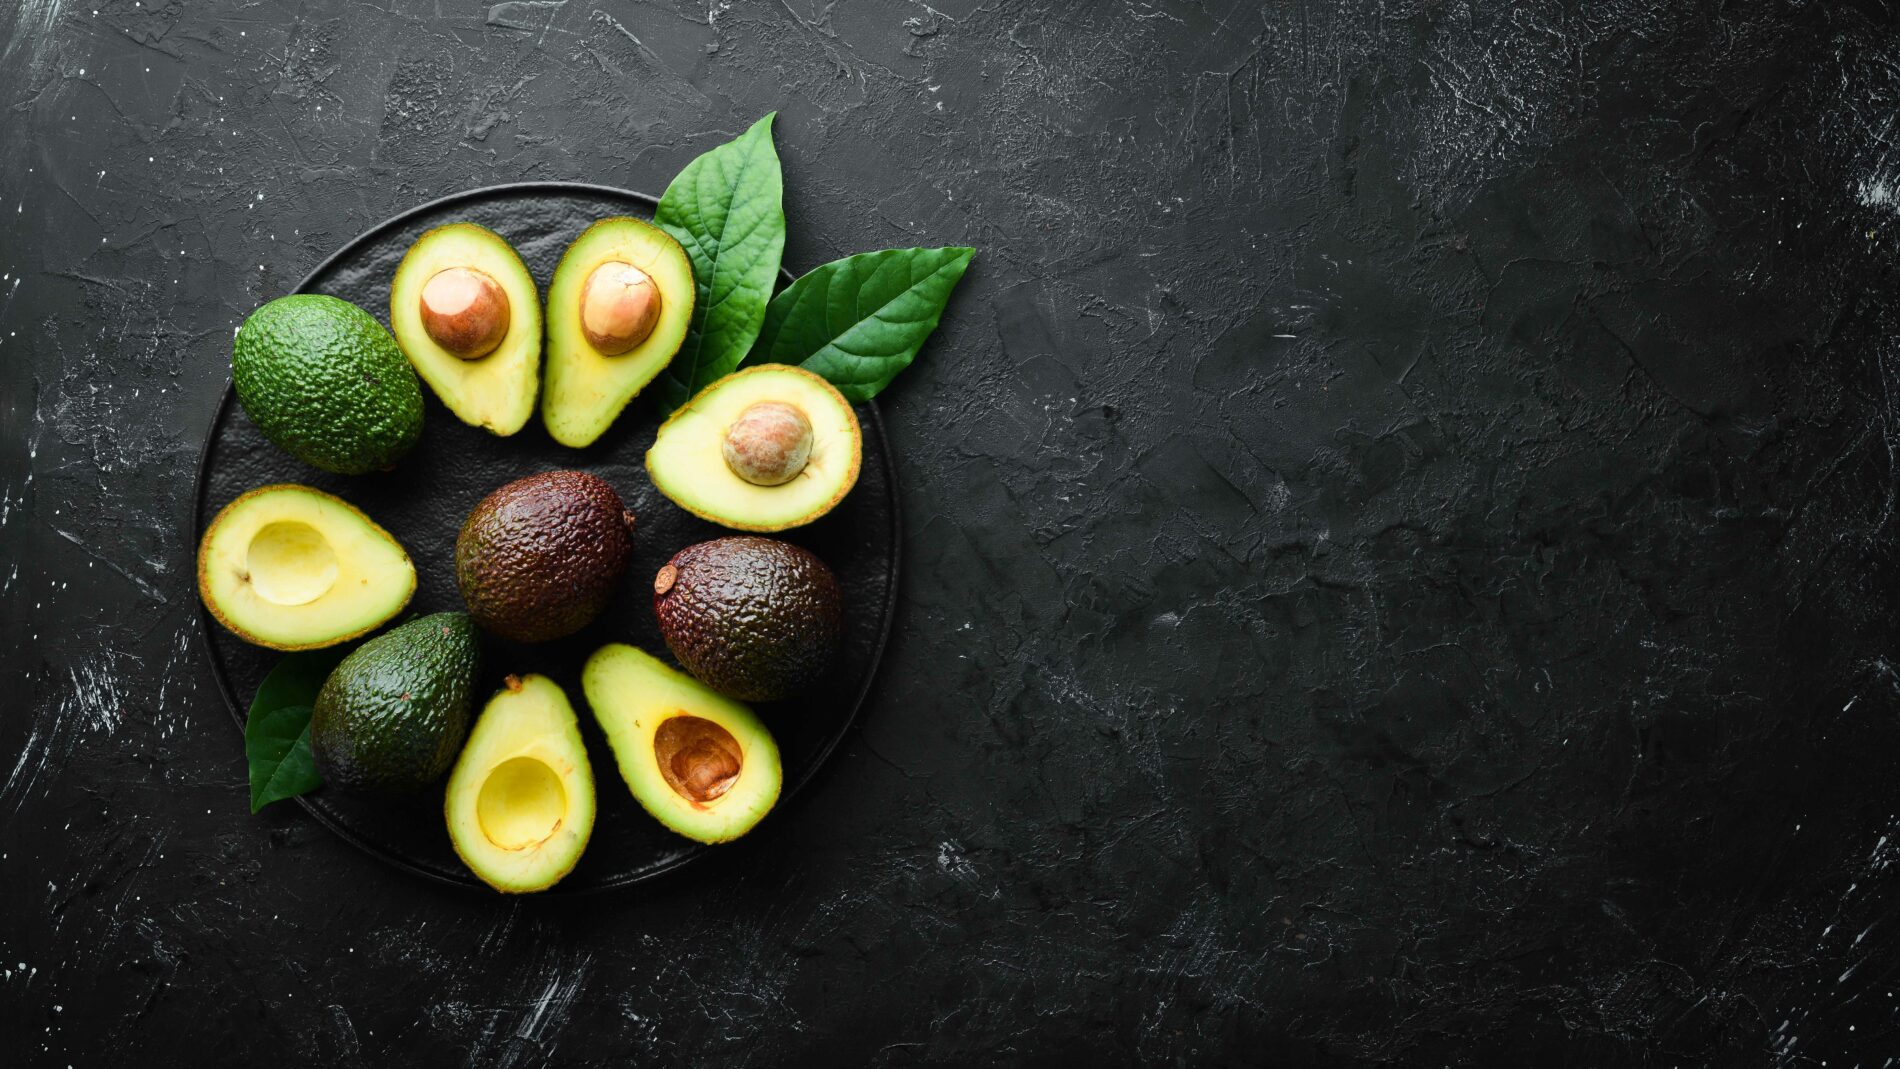 halved and whole avocados on arranged on a black plate on a black background